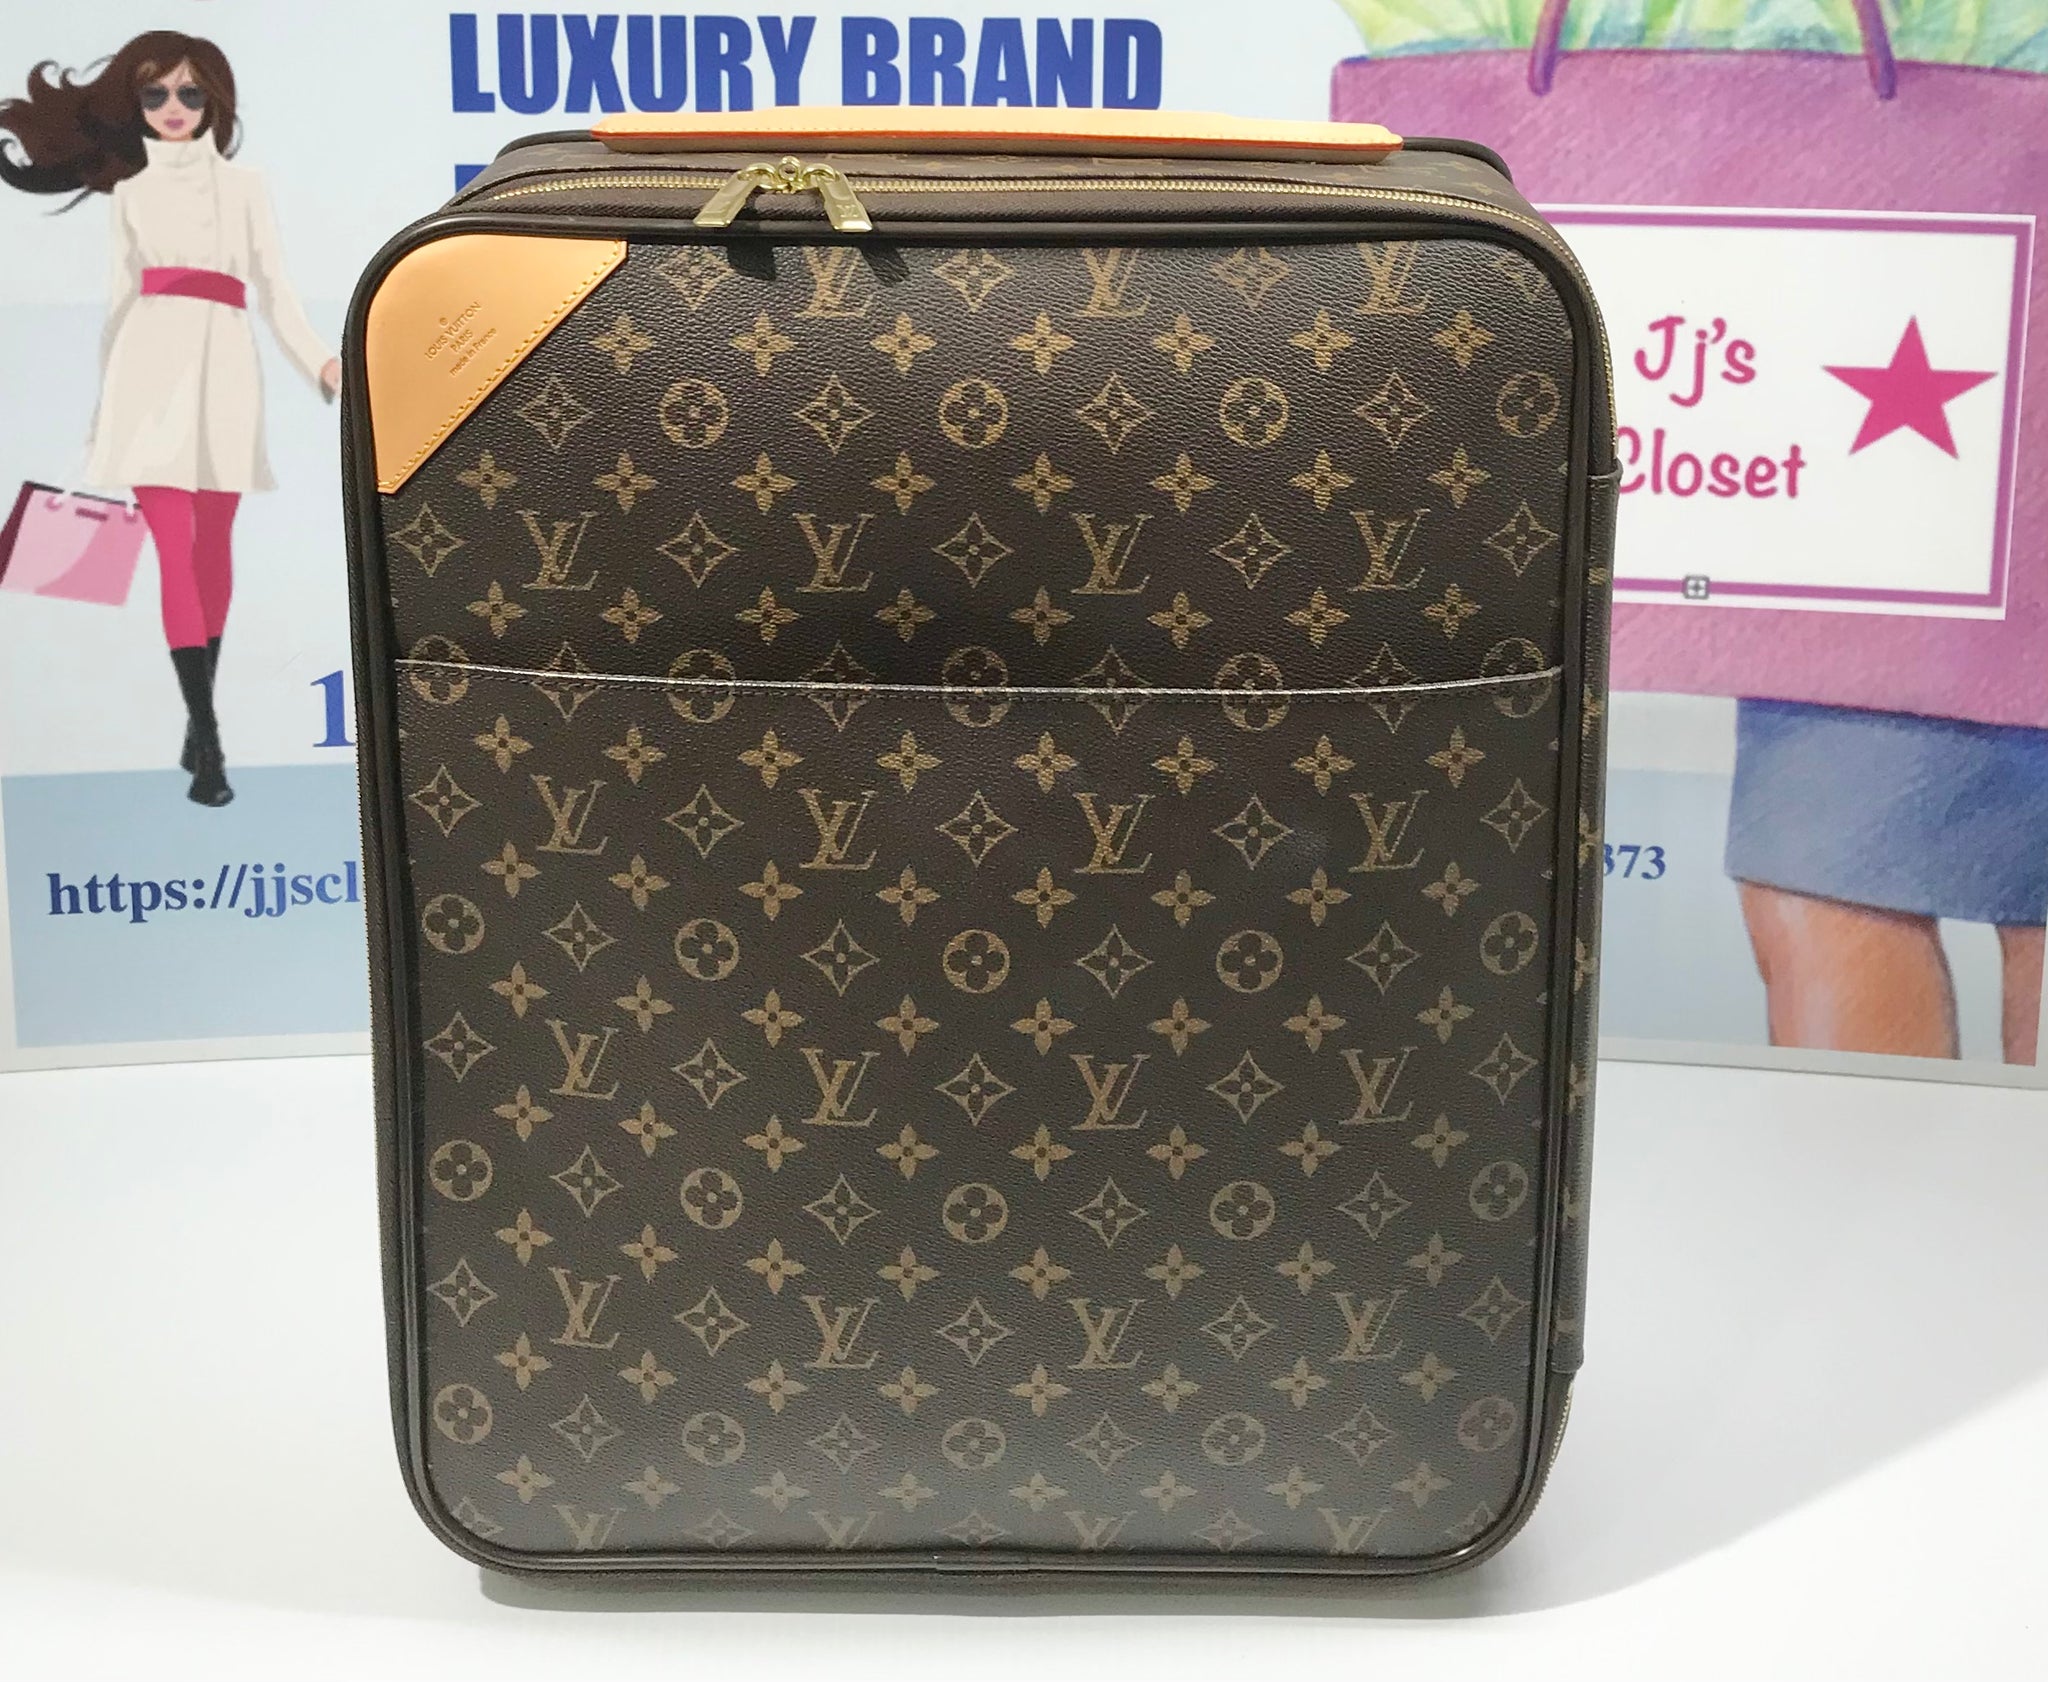 vuitton rolling luggage